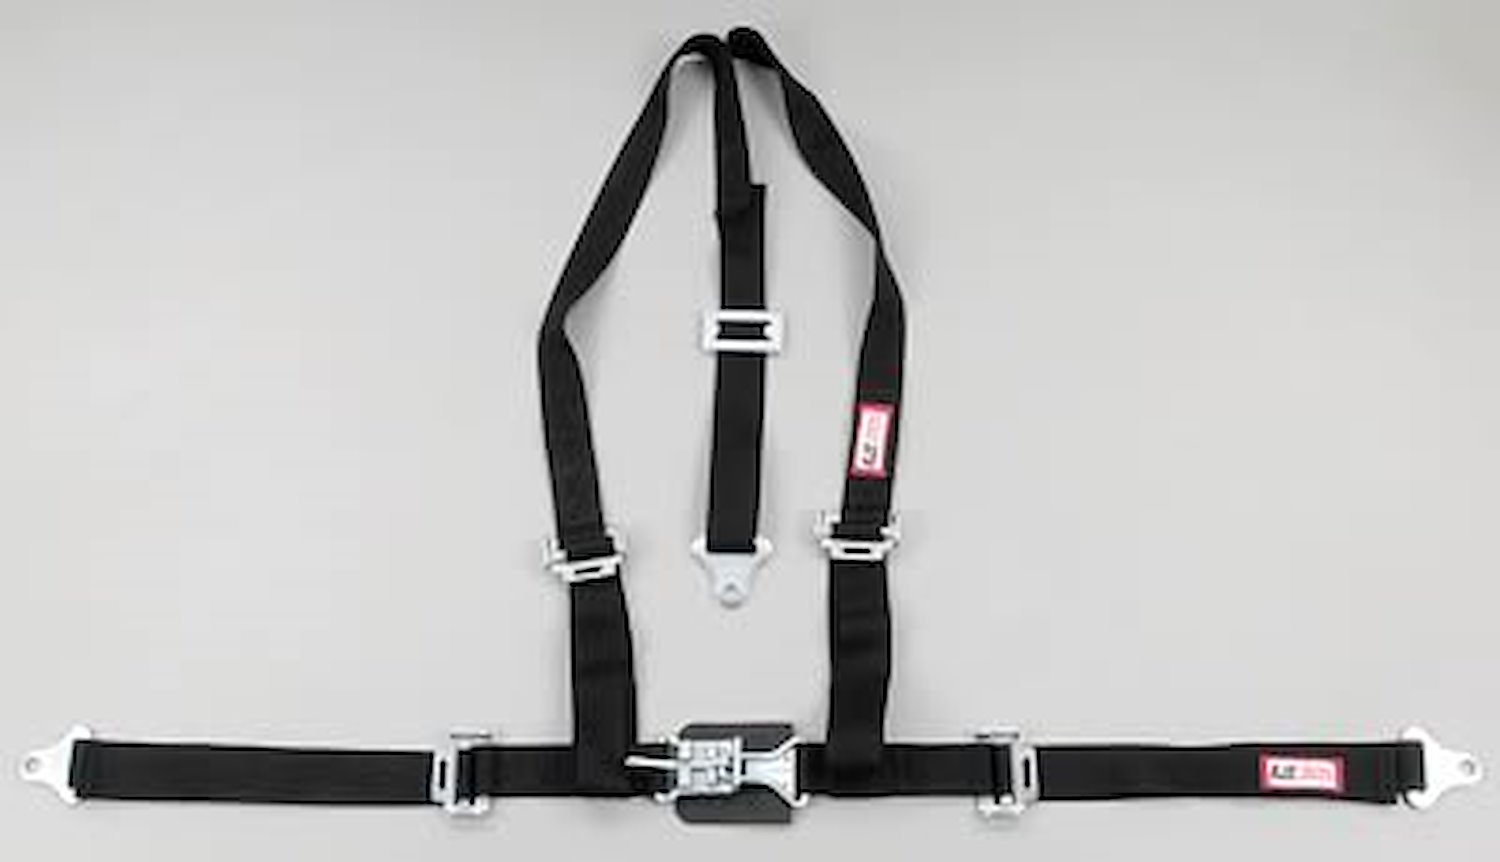 NON-SFI L&L HARNESS 3 PULL DOWN Lap Belt SEWN IN 2 Shoulder Harness V ROLL BAR Mount w/STERNUM STRAP ALL SNAP ENDS BLUE